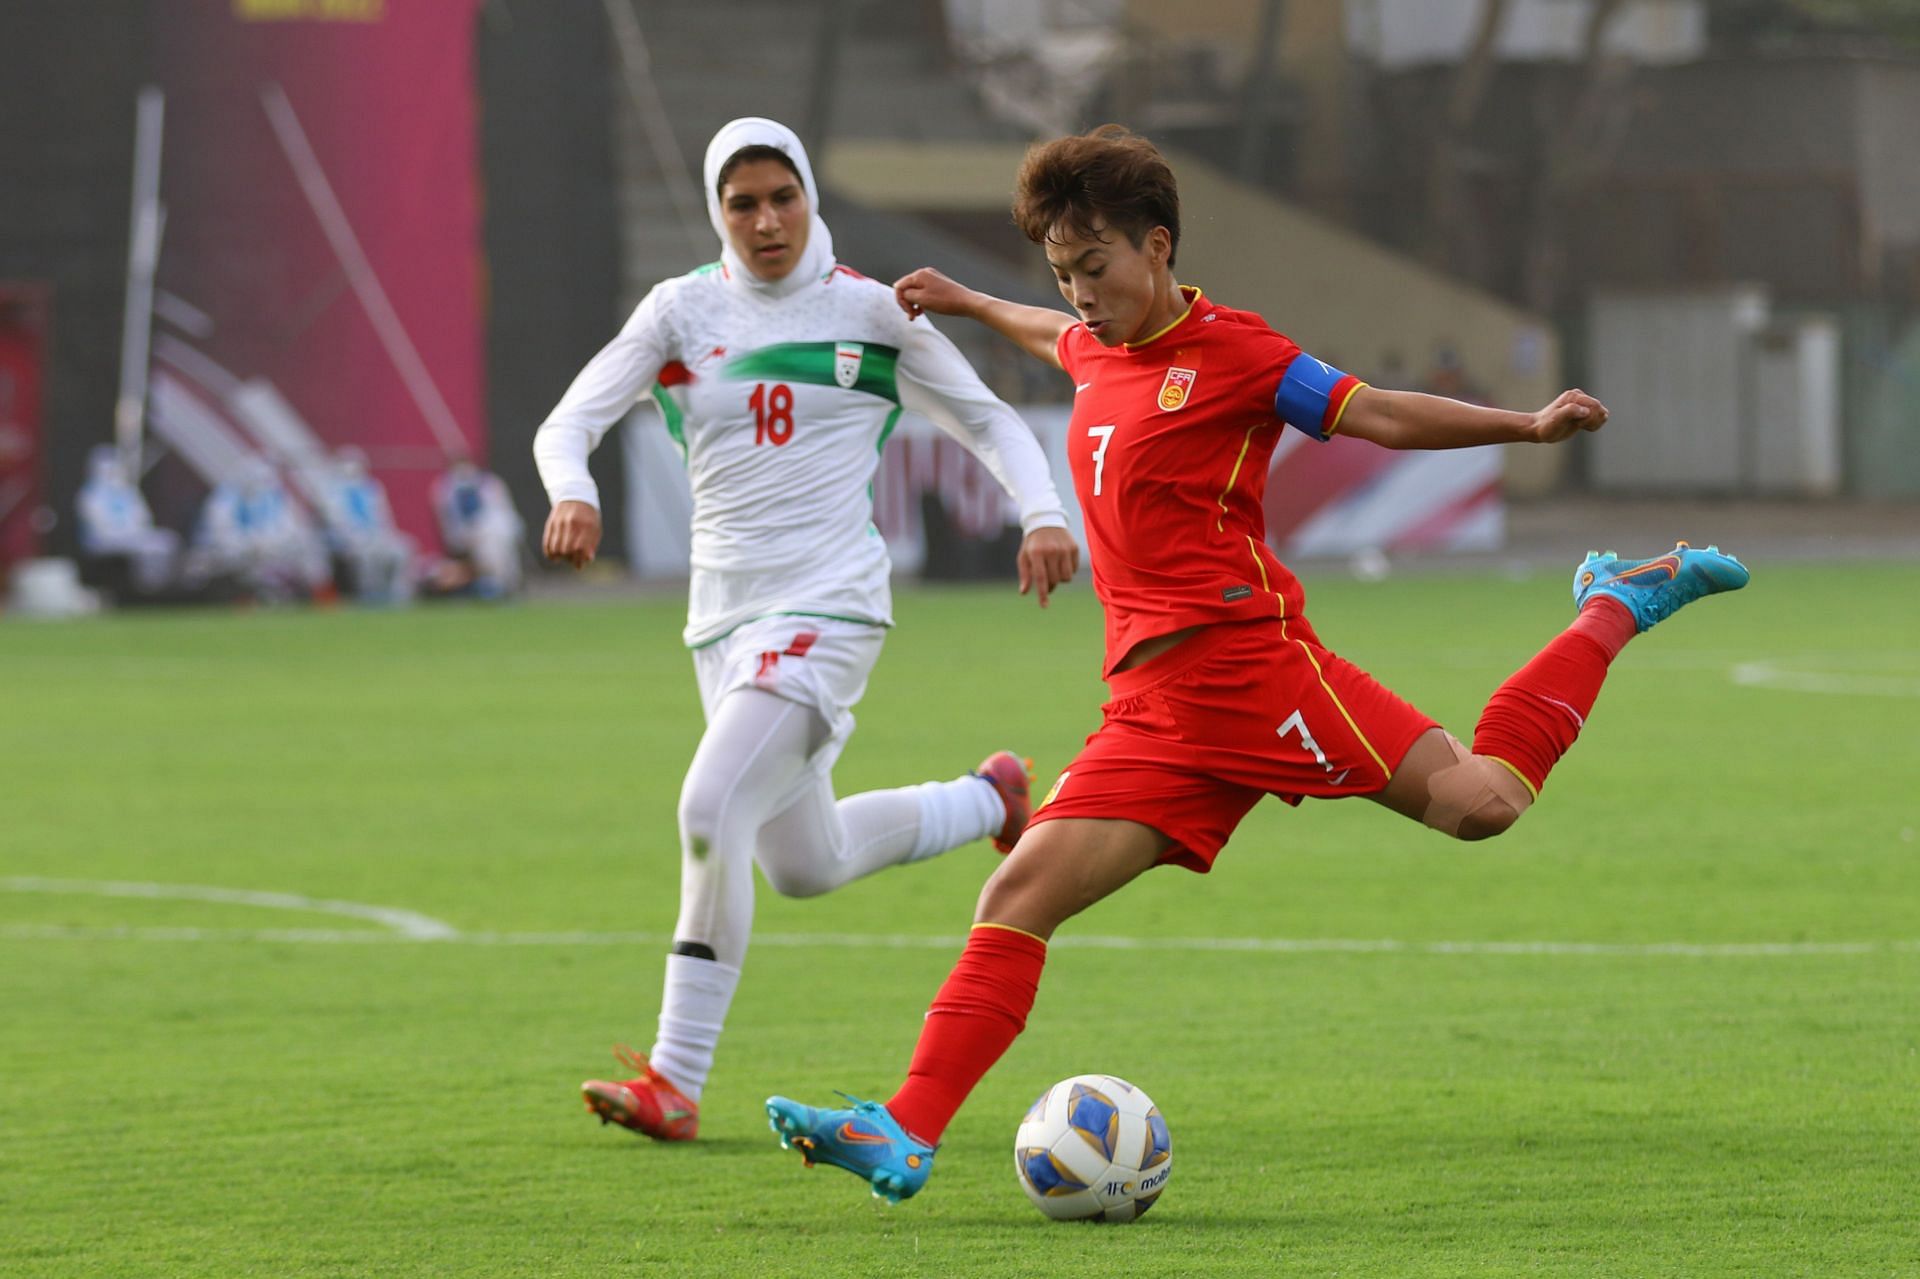 Wang Shuang scored two goals on her birthday. (Image: AFC)